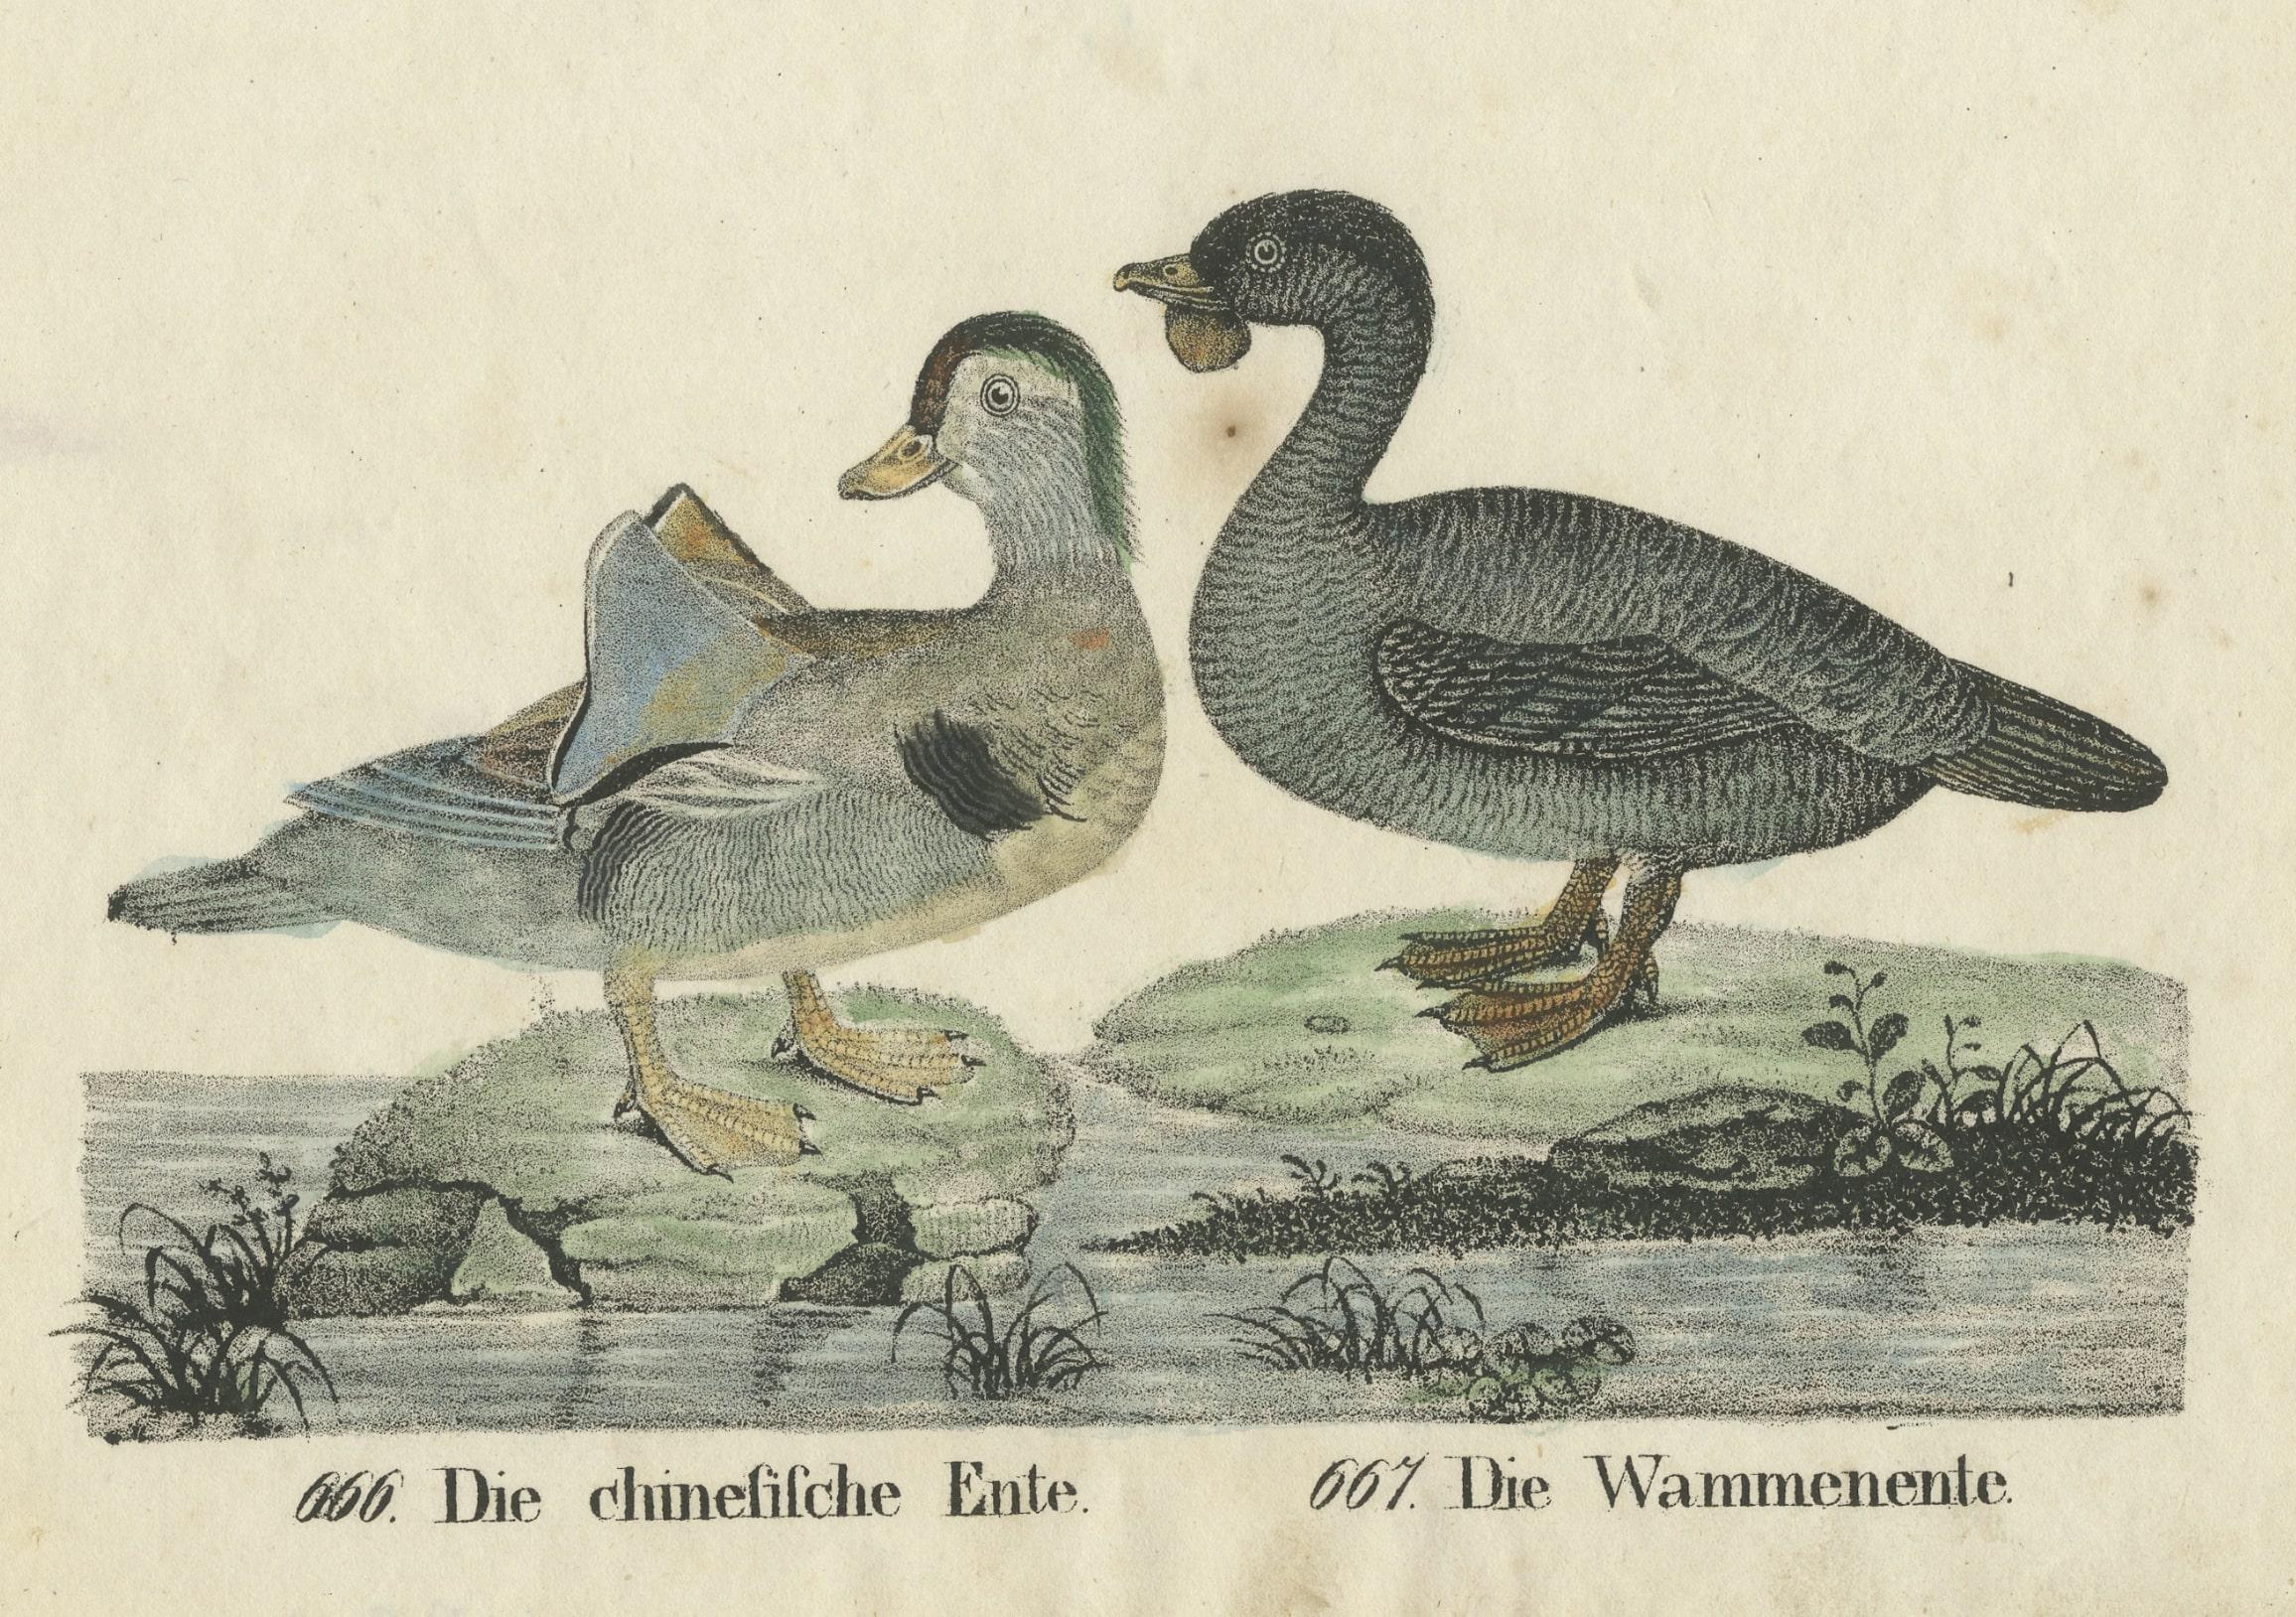 Antique print titled 'Die chinesische Ente - Die Wammenente'. This print shows two ducks (one of them is most likely a Mandarin Duck). This print originates from 